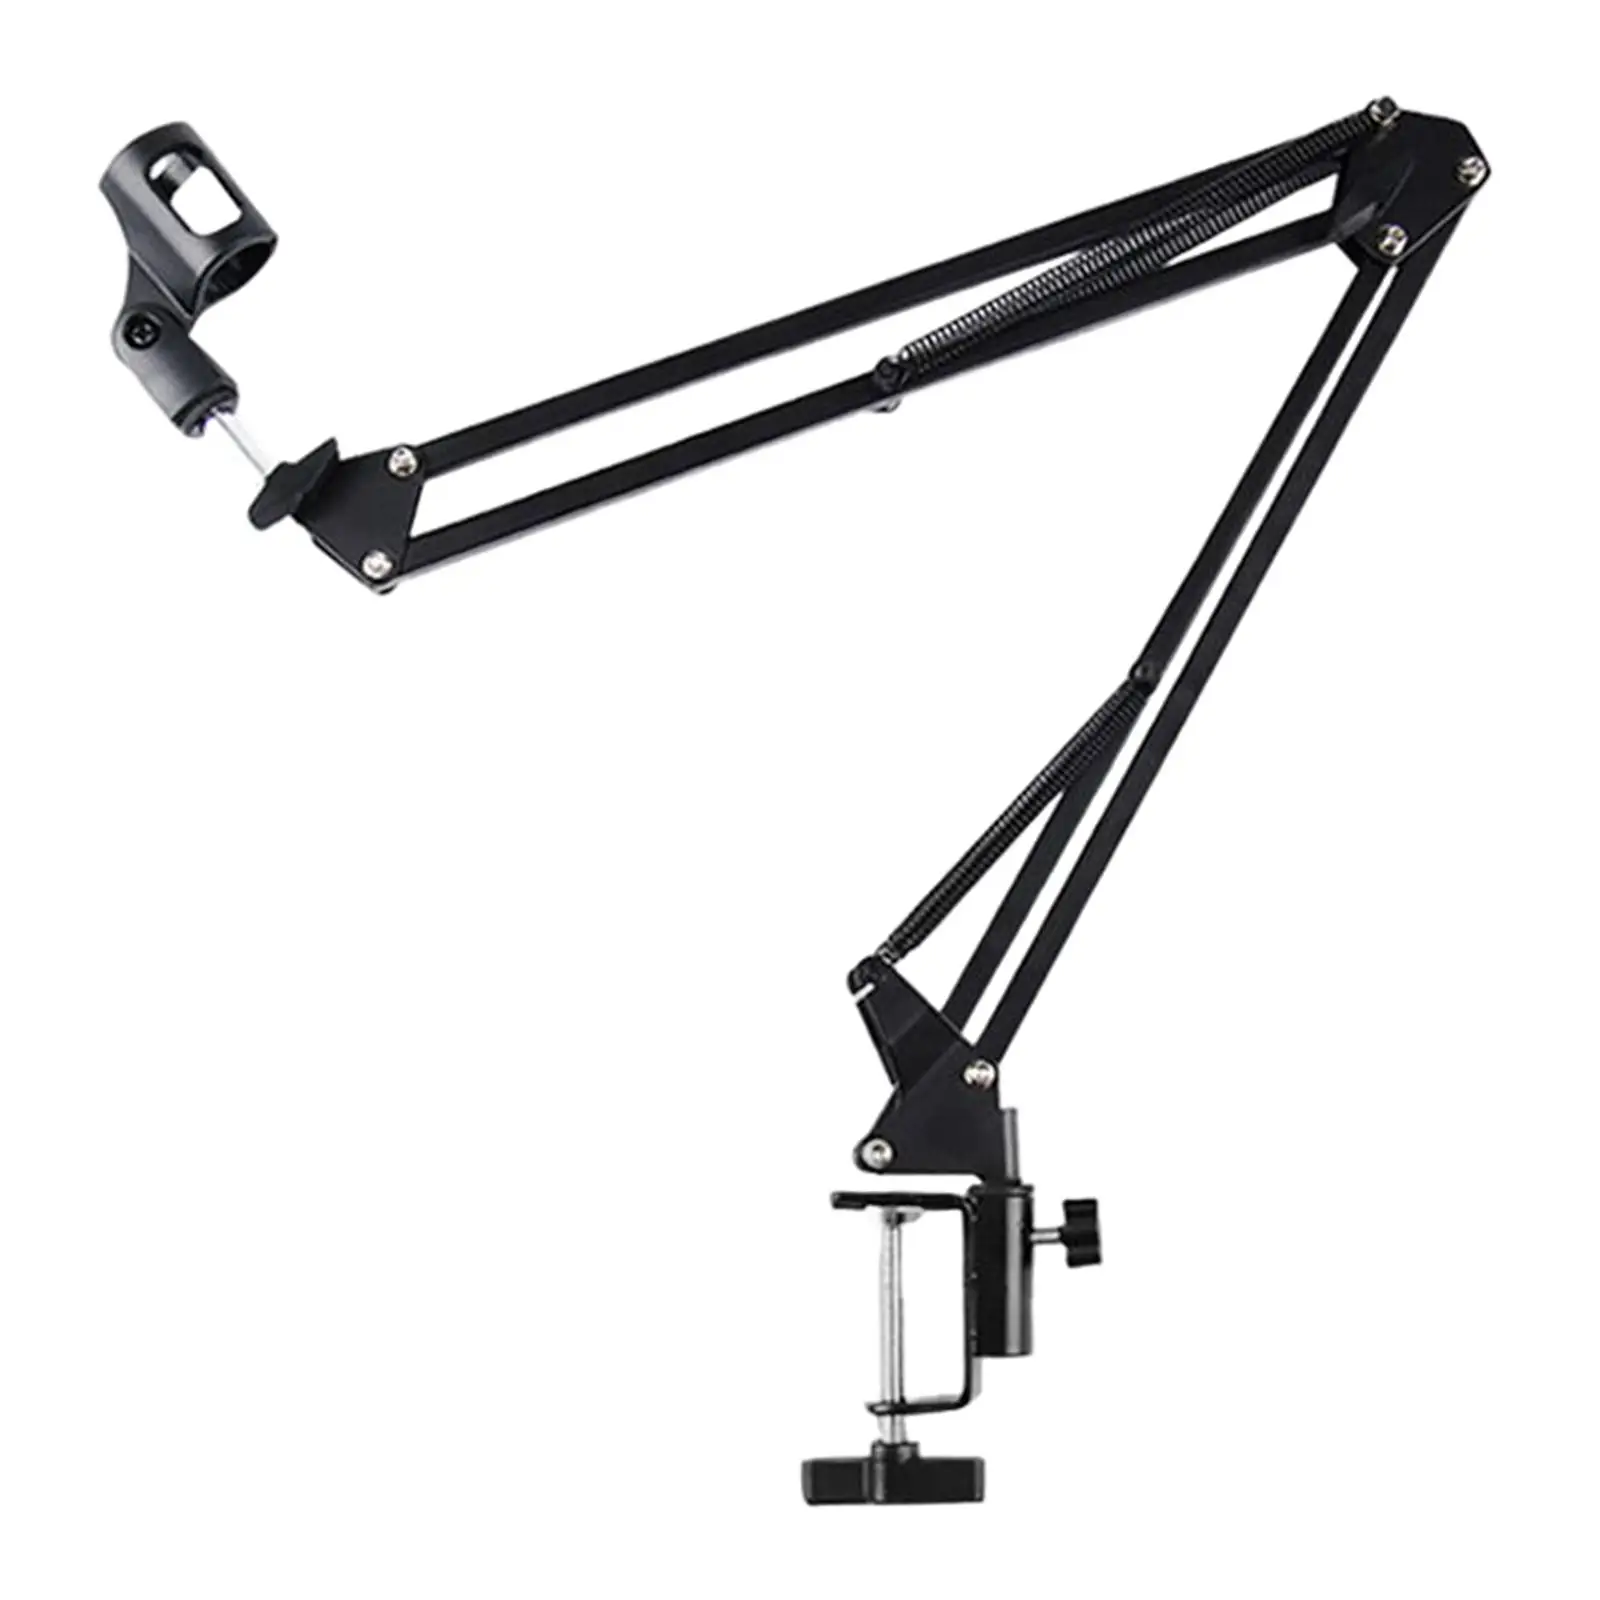 Adjustable Mic Stand Stable with Desk Clamp Sturdy Universal Steel Desktop Holder Mic  Mount for Broadcasting Studio